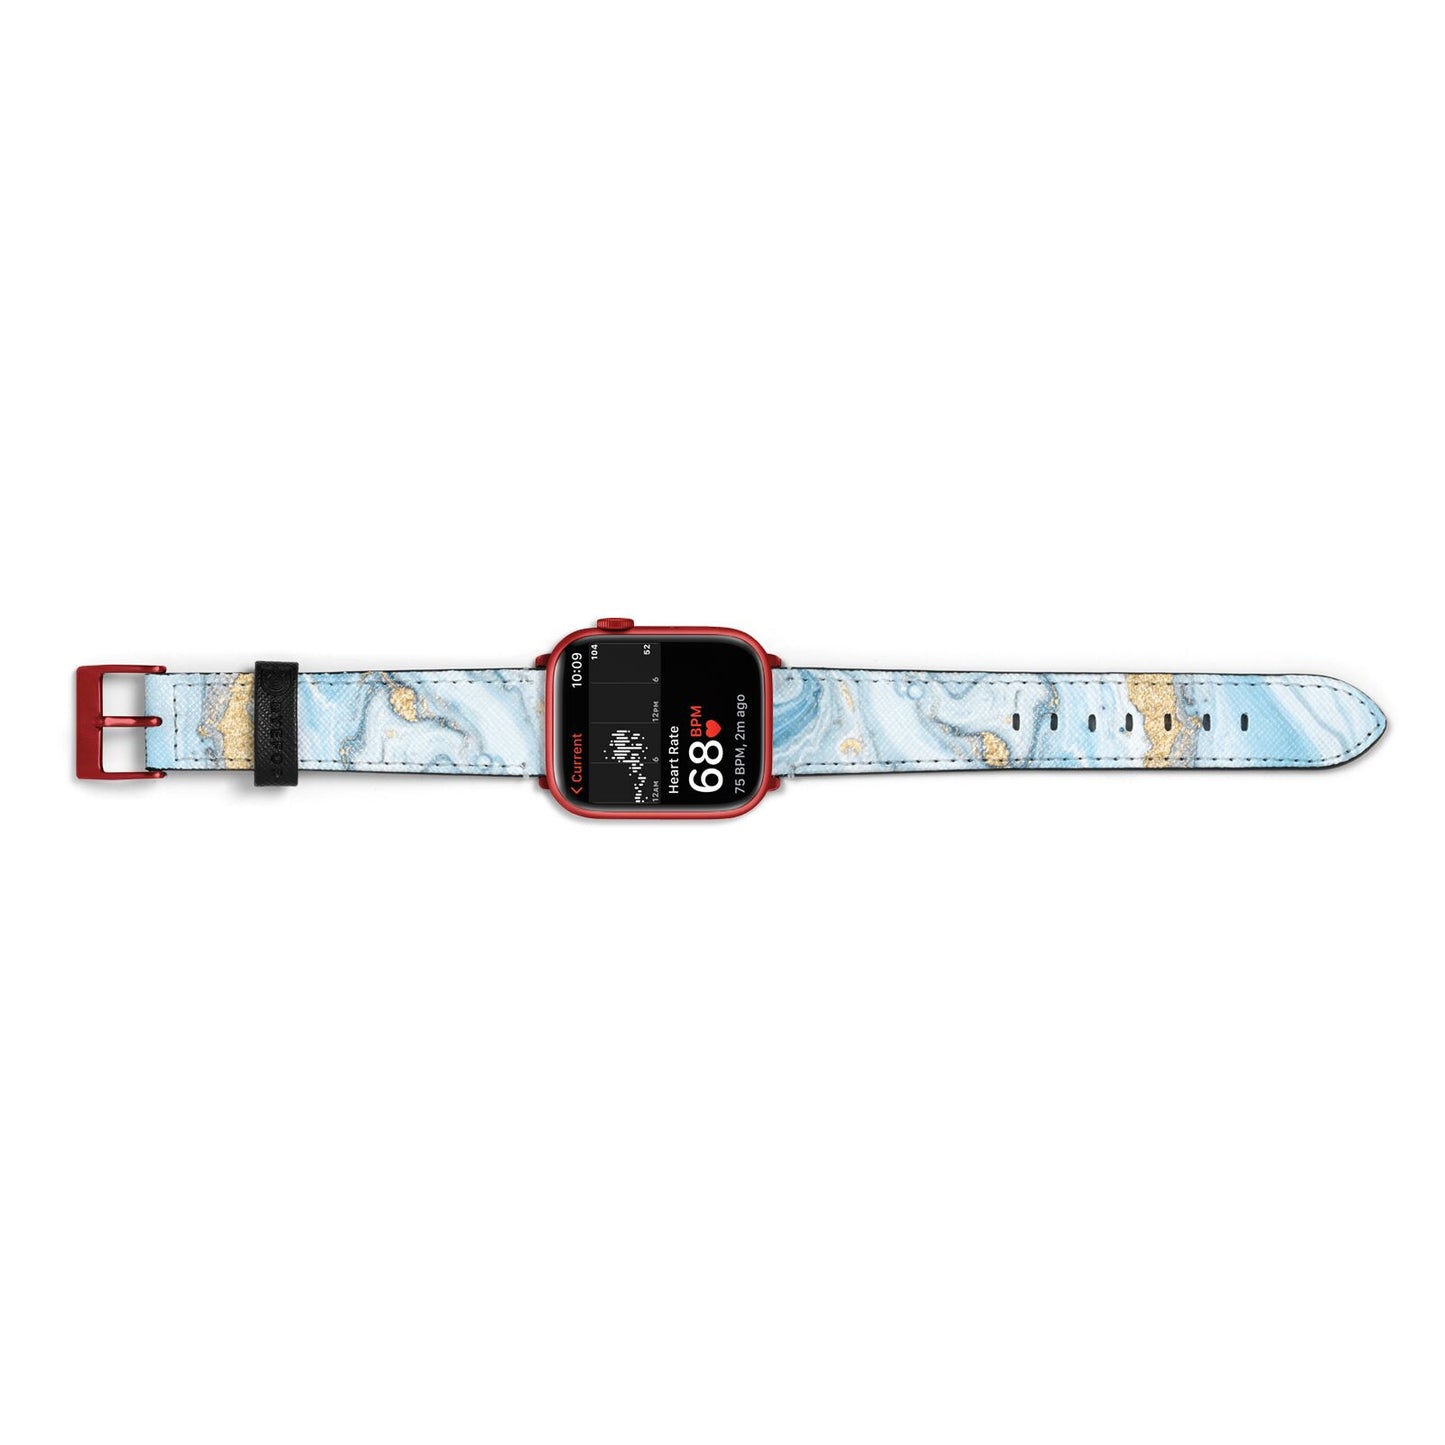 Marble Apple Watch Strap Size 38mm Landscape Image Red Hardware